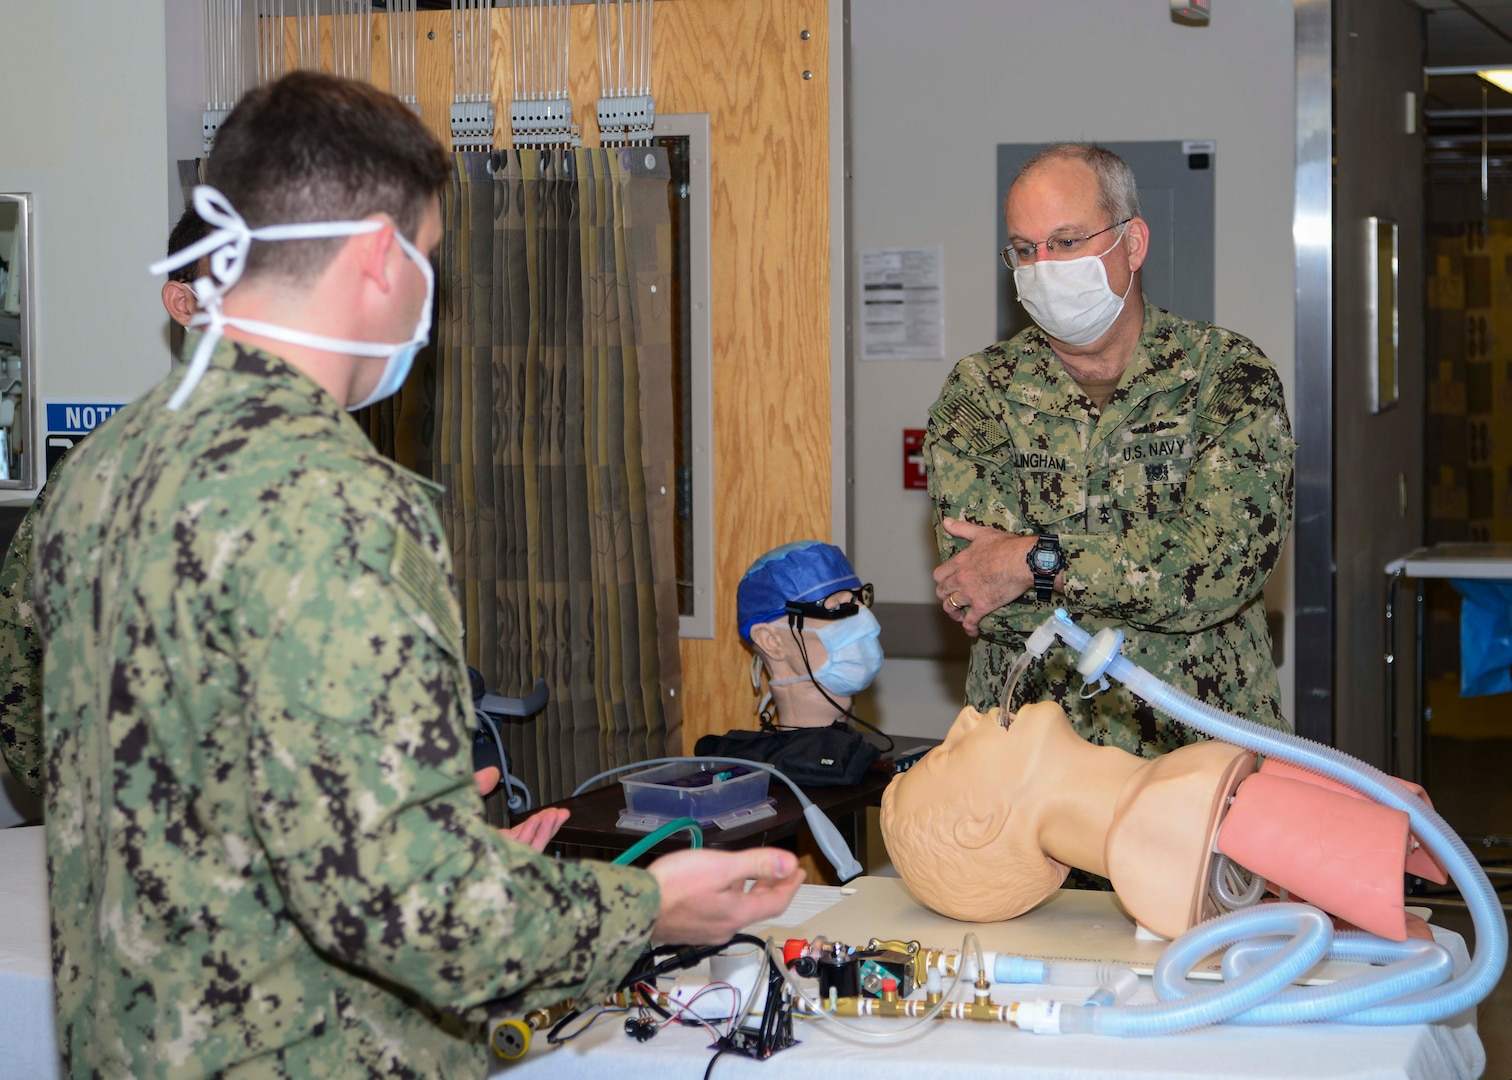 PORTSMOUTH, Va. (Oct. 21, 2020) – Lt. Cmdr. Jacob Cole, left, assistant director of the Anesthesiology Residency Program at Naval Medical Center Portsmouth (NMCP), presents NMCP’s made in-house ventilator to Rear Adm. Bruce Gillingham, surgeon general of the U.S. Navy and chief, of the Bureau of Medicine and Surgery, during his visit of NMCP on Oct. 21.